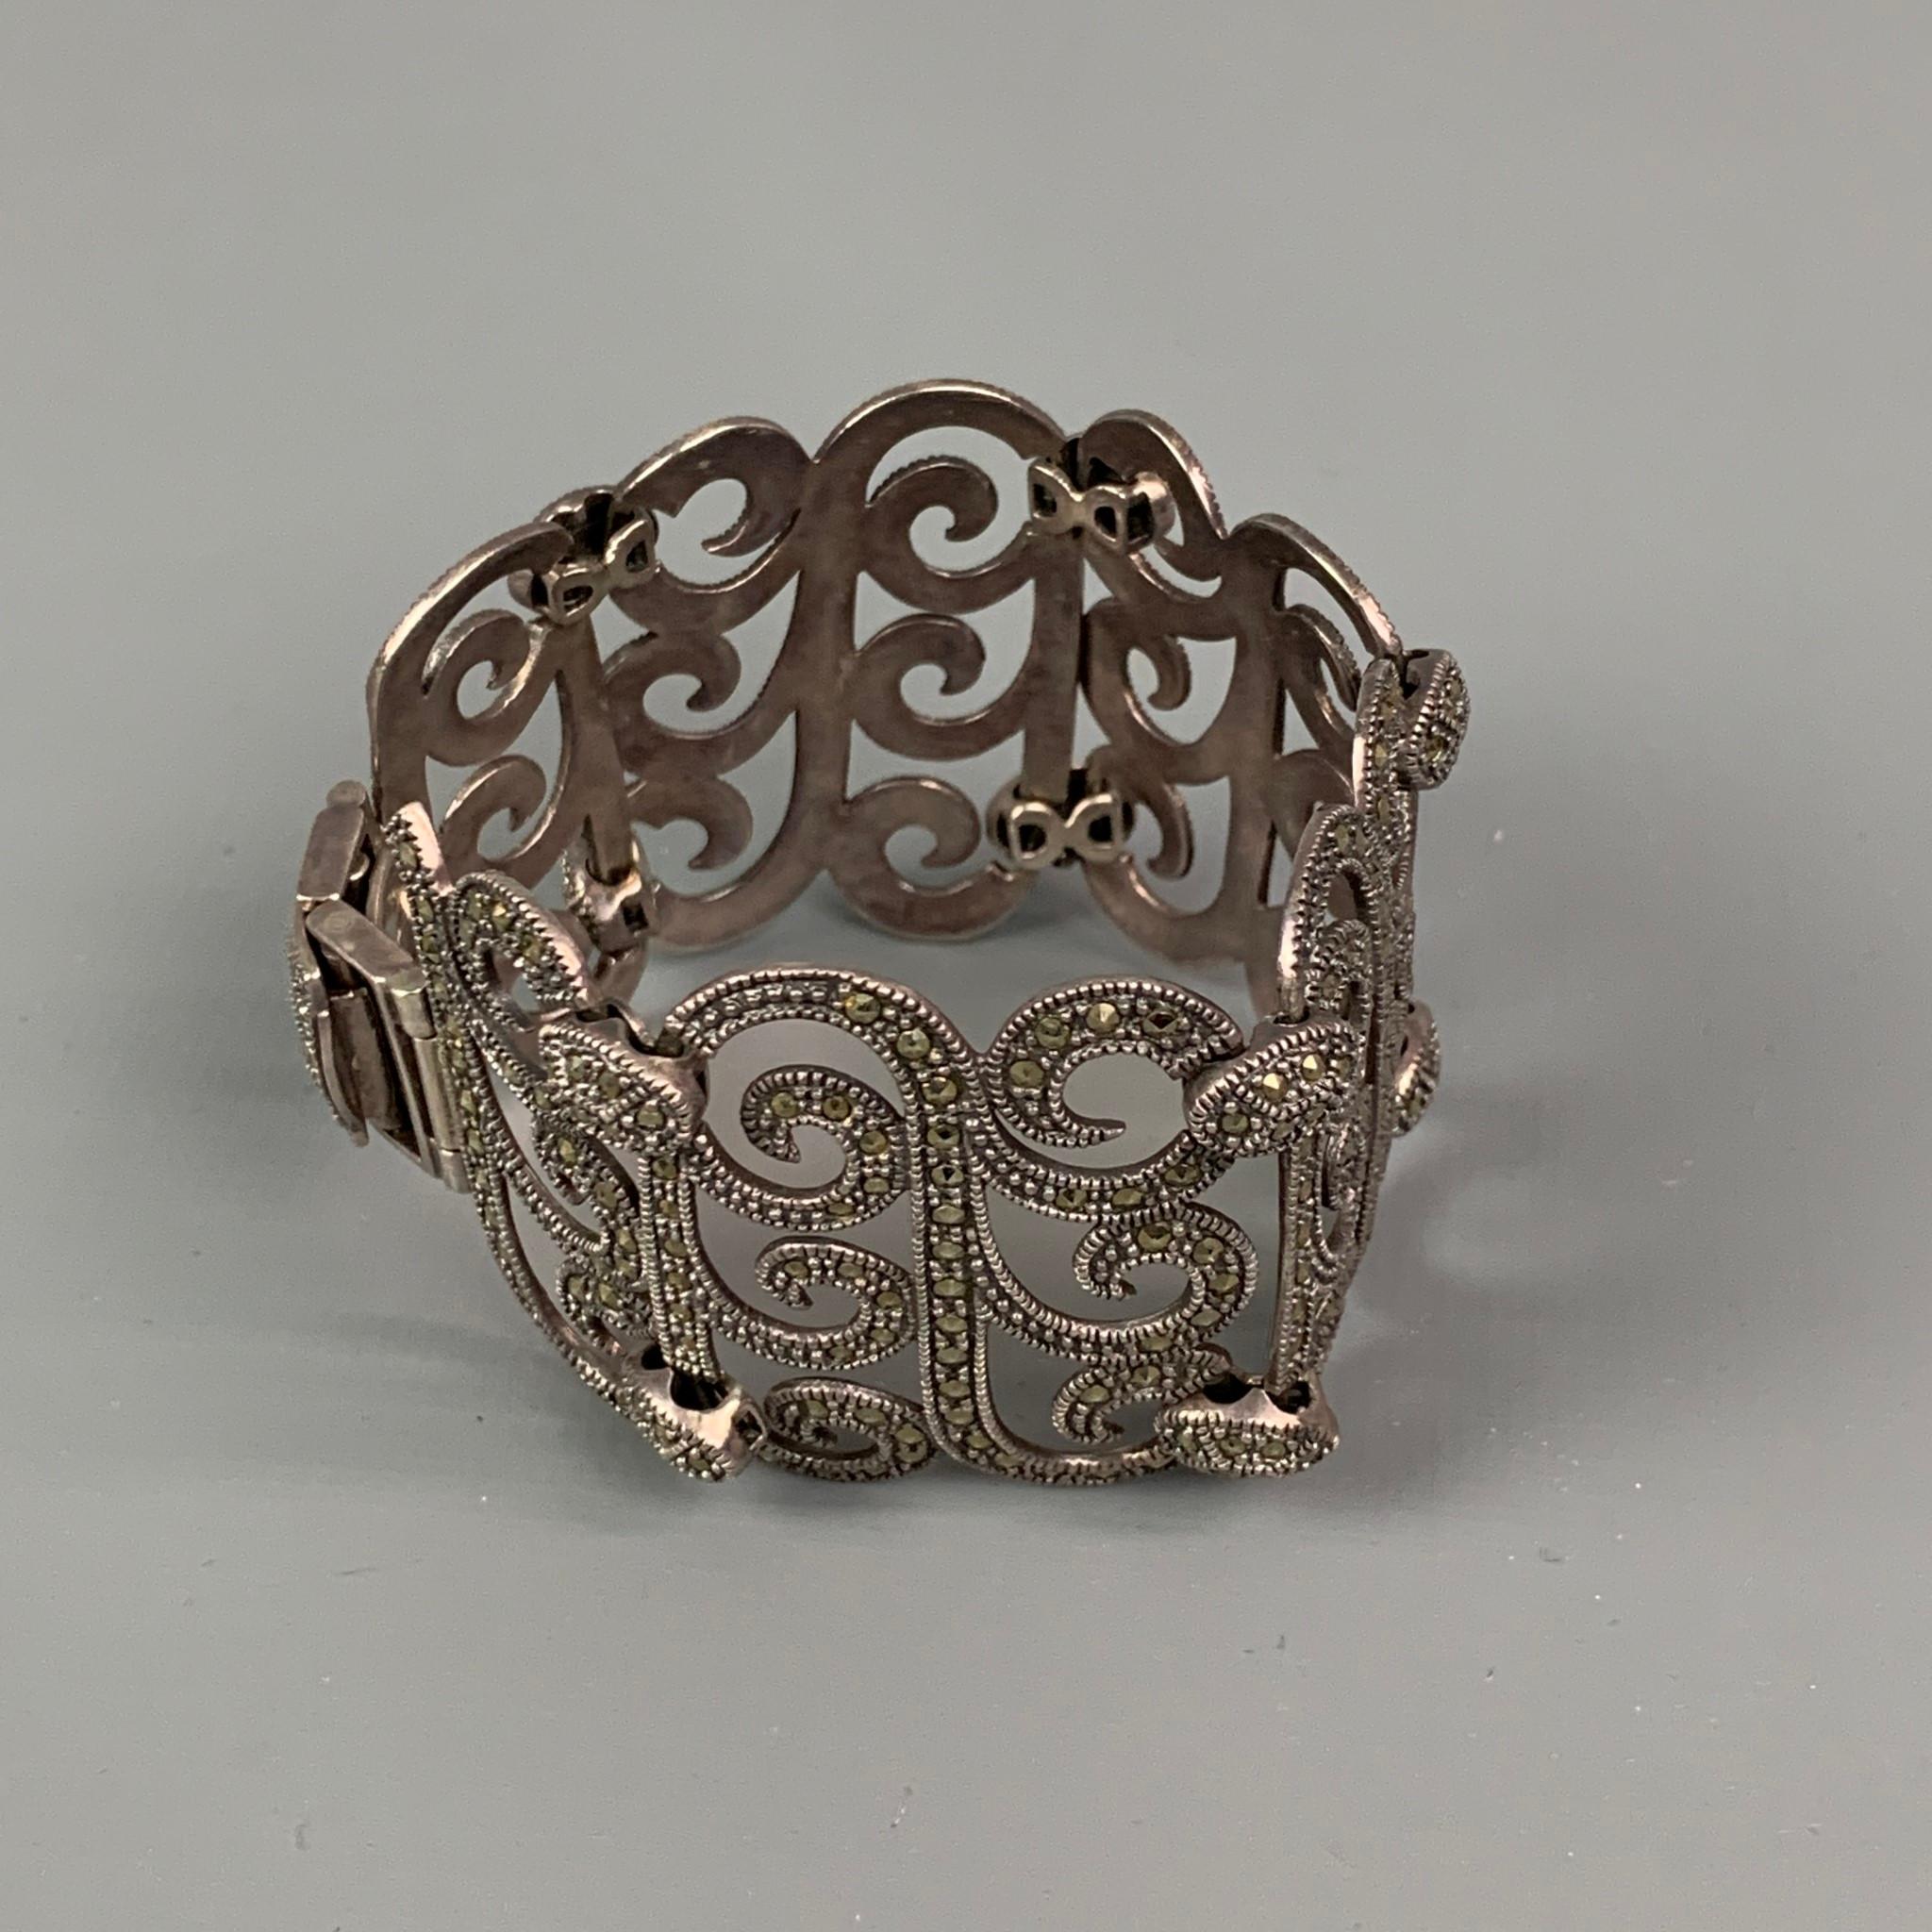 VINTAGE bracelet comes in a sterling silver featuring a marcasite link style with a clasp closure. 

Good Pre-Owned Condition.
Marked: 925

Measurements:

Length: 7.25 in.
Width: 1.5 in. 